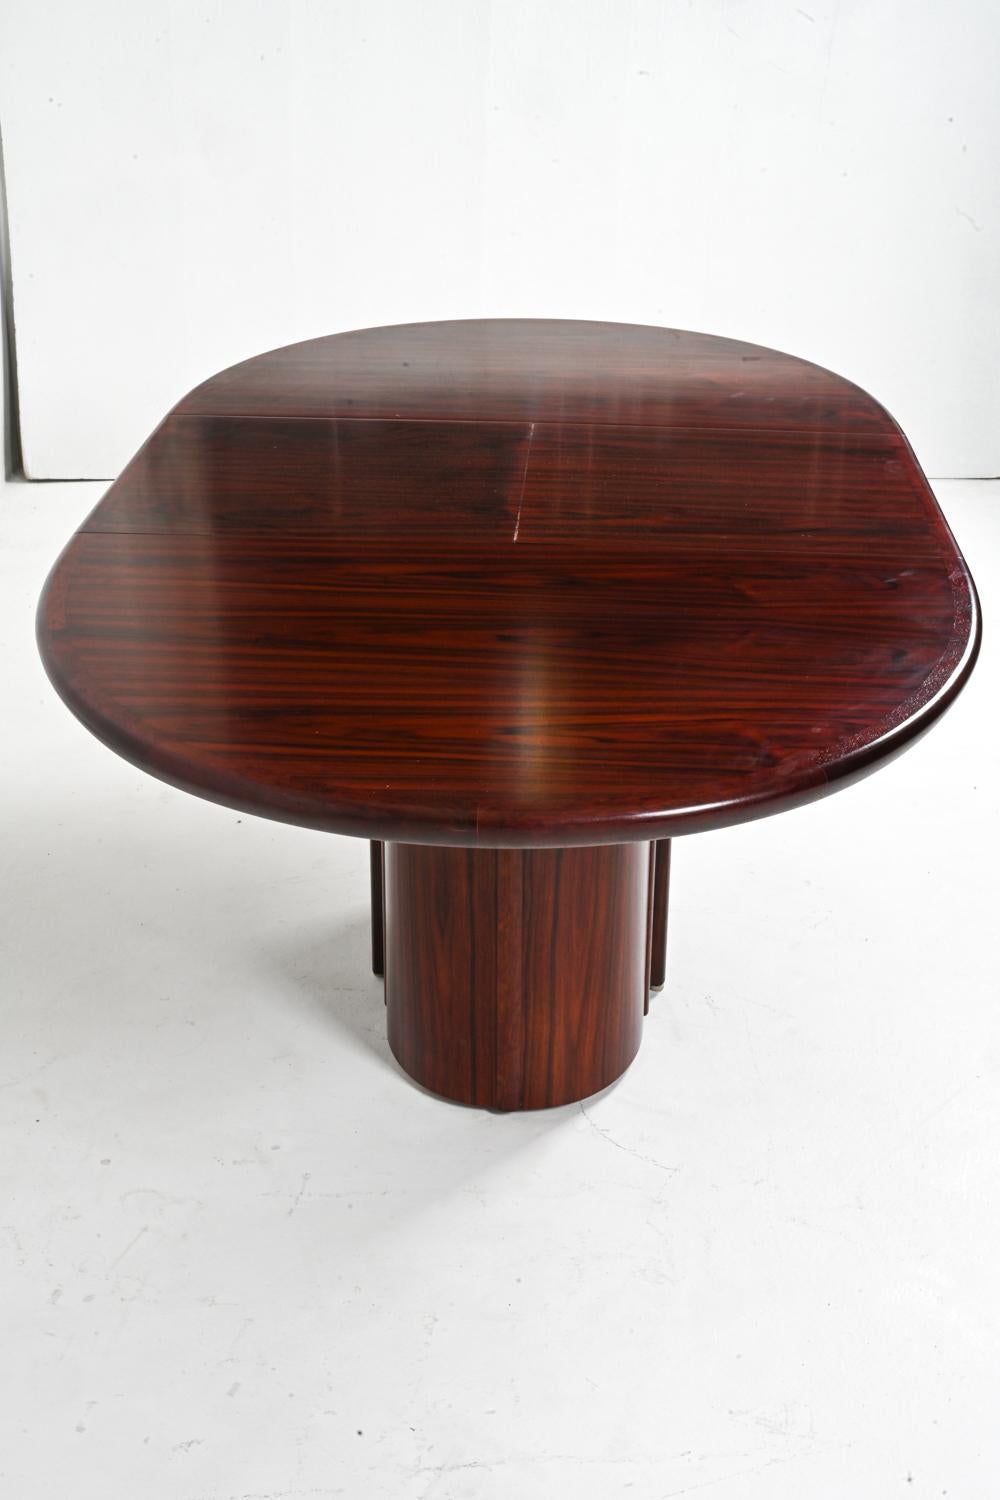 Art Deco-Style Butterfly Leaf Dining Table by Skovby, Denmark 1970's In Good Condition For Sale In Norwalk, CT